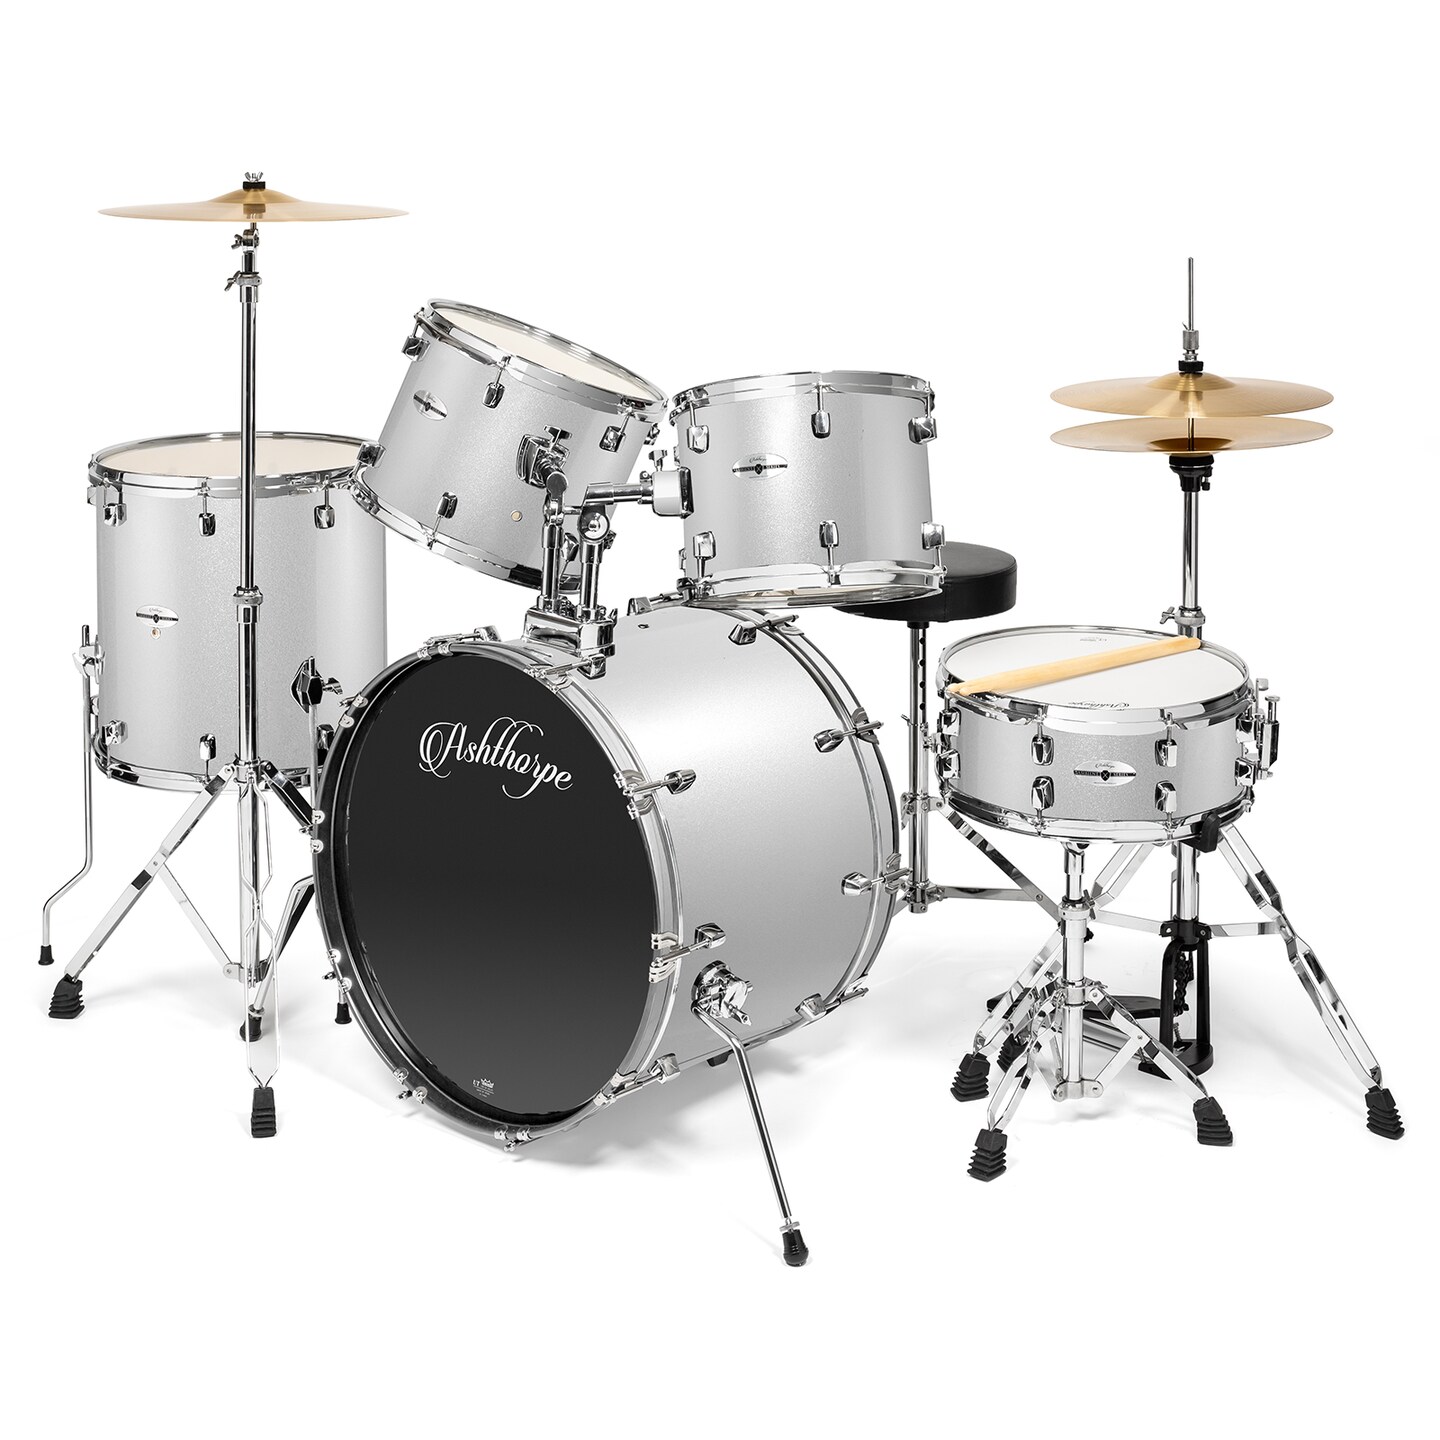 Ashthorpe 5-Piece Full Size Adult Drum Set with Remo Heads &#x26; Premium Brass Cymbals - Complete Professional Percussion Kit with Chrome Hardware